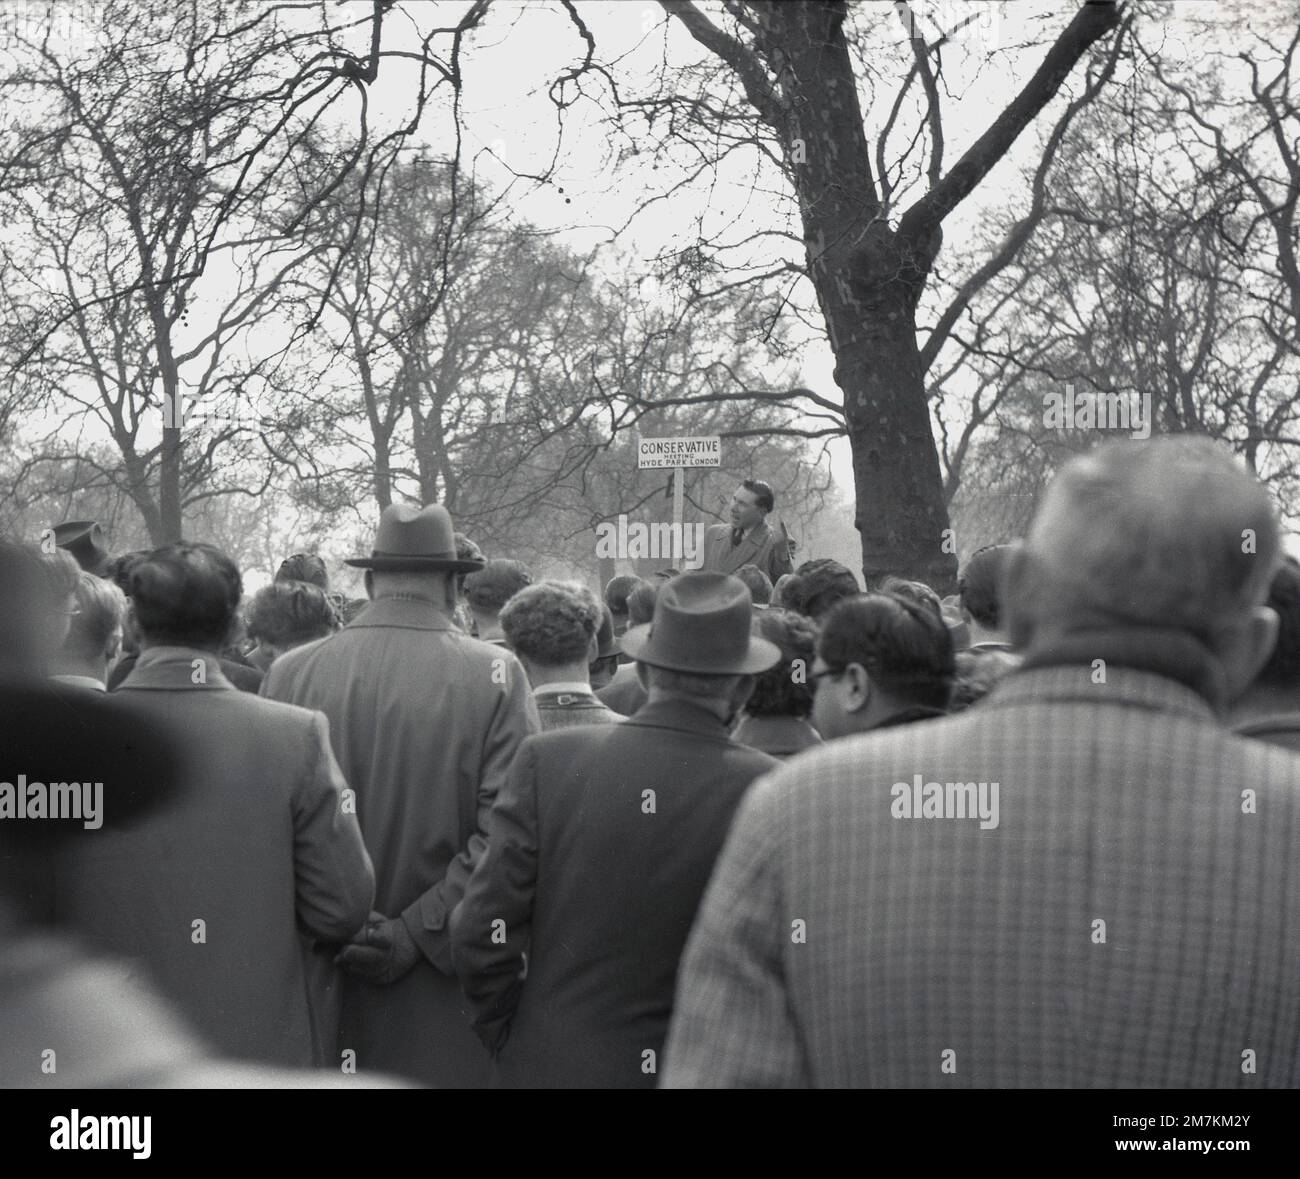 1950s, historical, people in London's Hyde Park at speakers corner, a public speaking platform, listening to a man holding a placard saying Conservative Meeting. Since the mid-1800s, an area in the Royal Park has been a place for a Sunday soapbox for people to communicate to the masses, including notable figures such as George Orwell and Karl Marx. Stock Photo